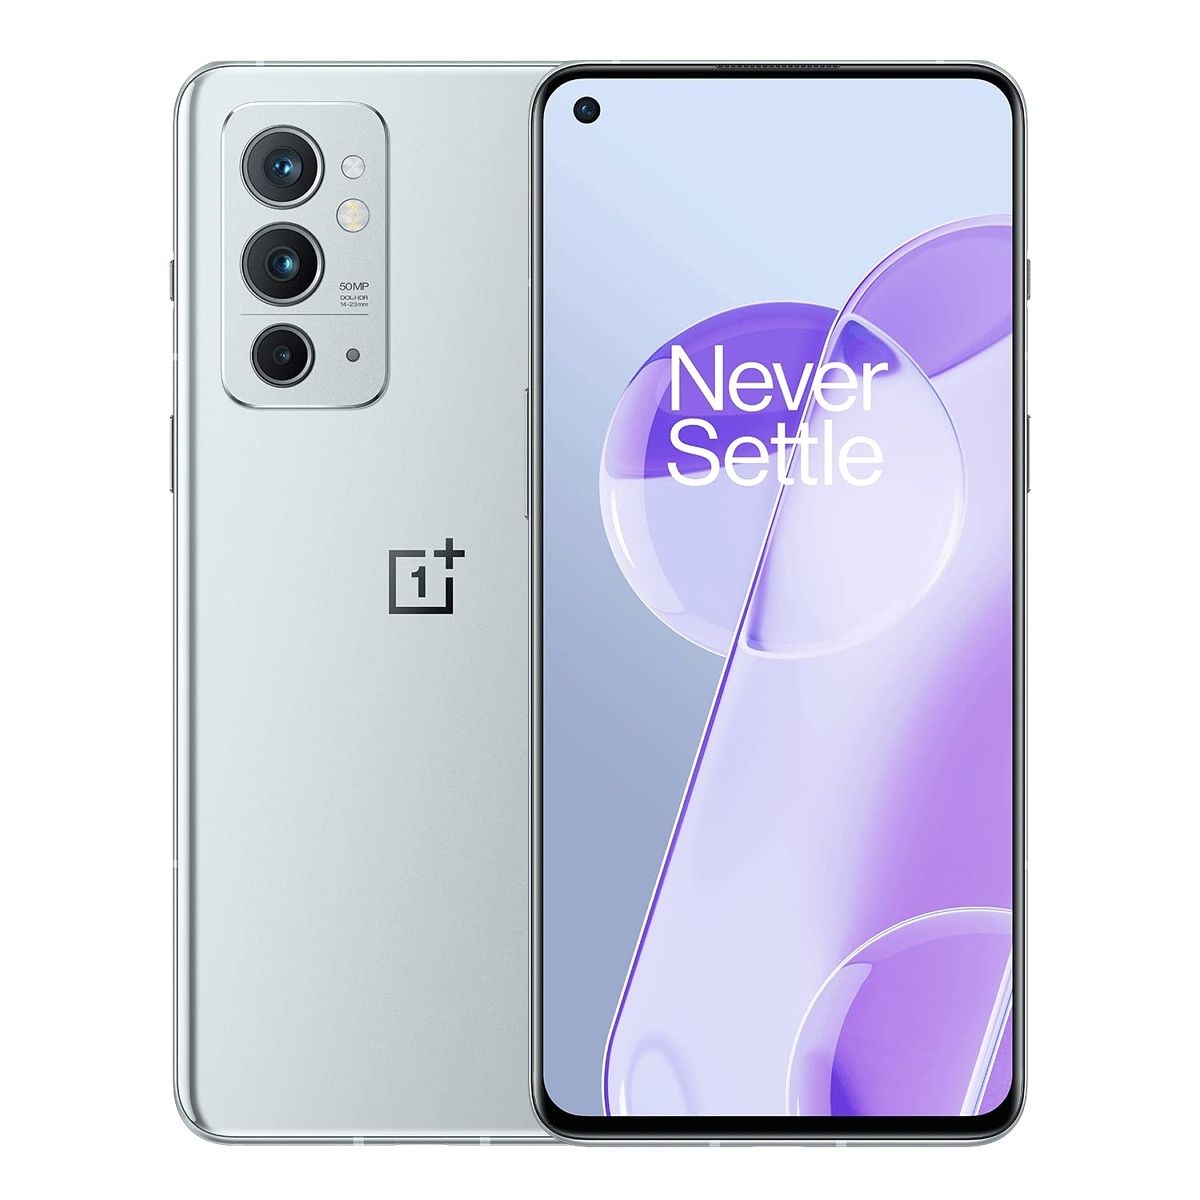 The OnePlus 9RT is a good phone that delivers on almost all fronts. However, there are better phones out there with more aggressive pricing that make the OnePlus 9RT feel slightly expensive.